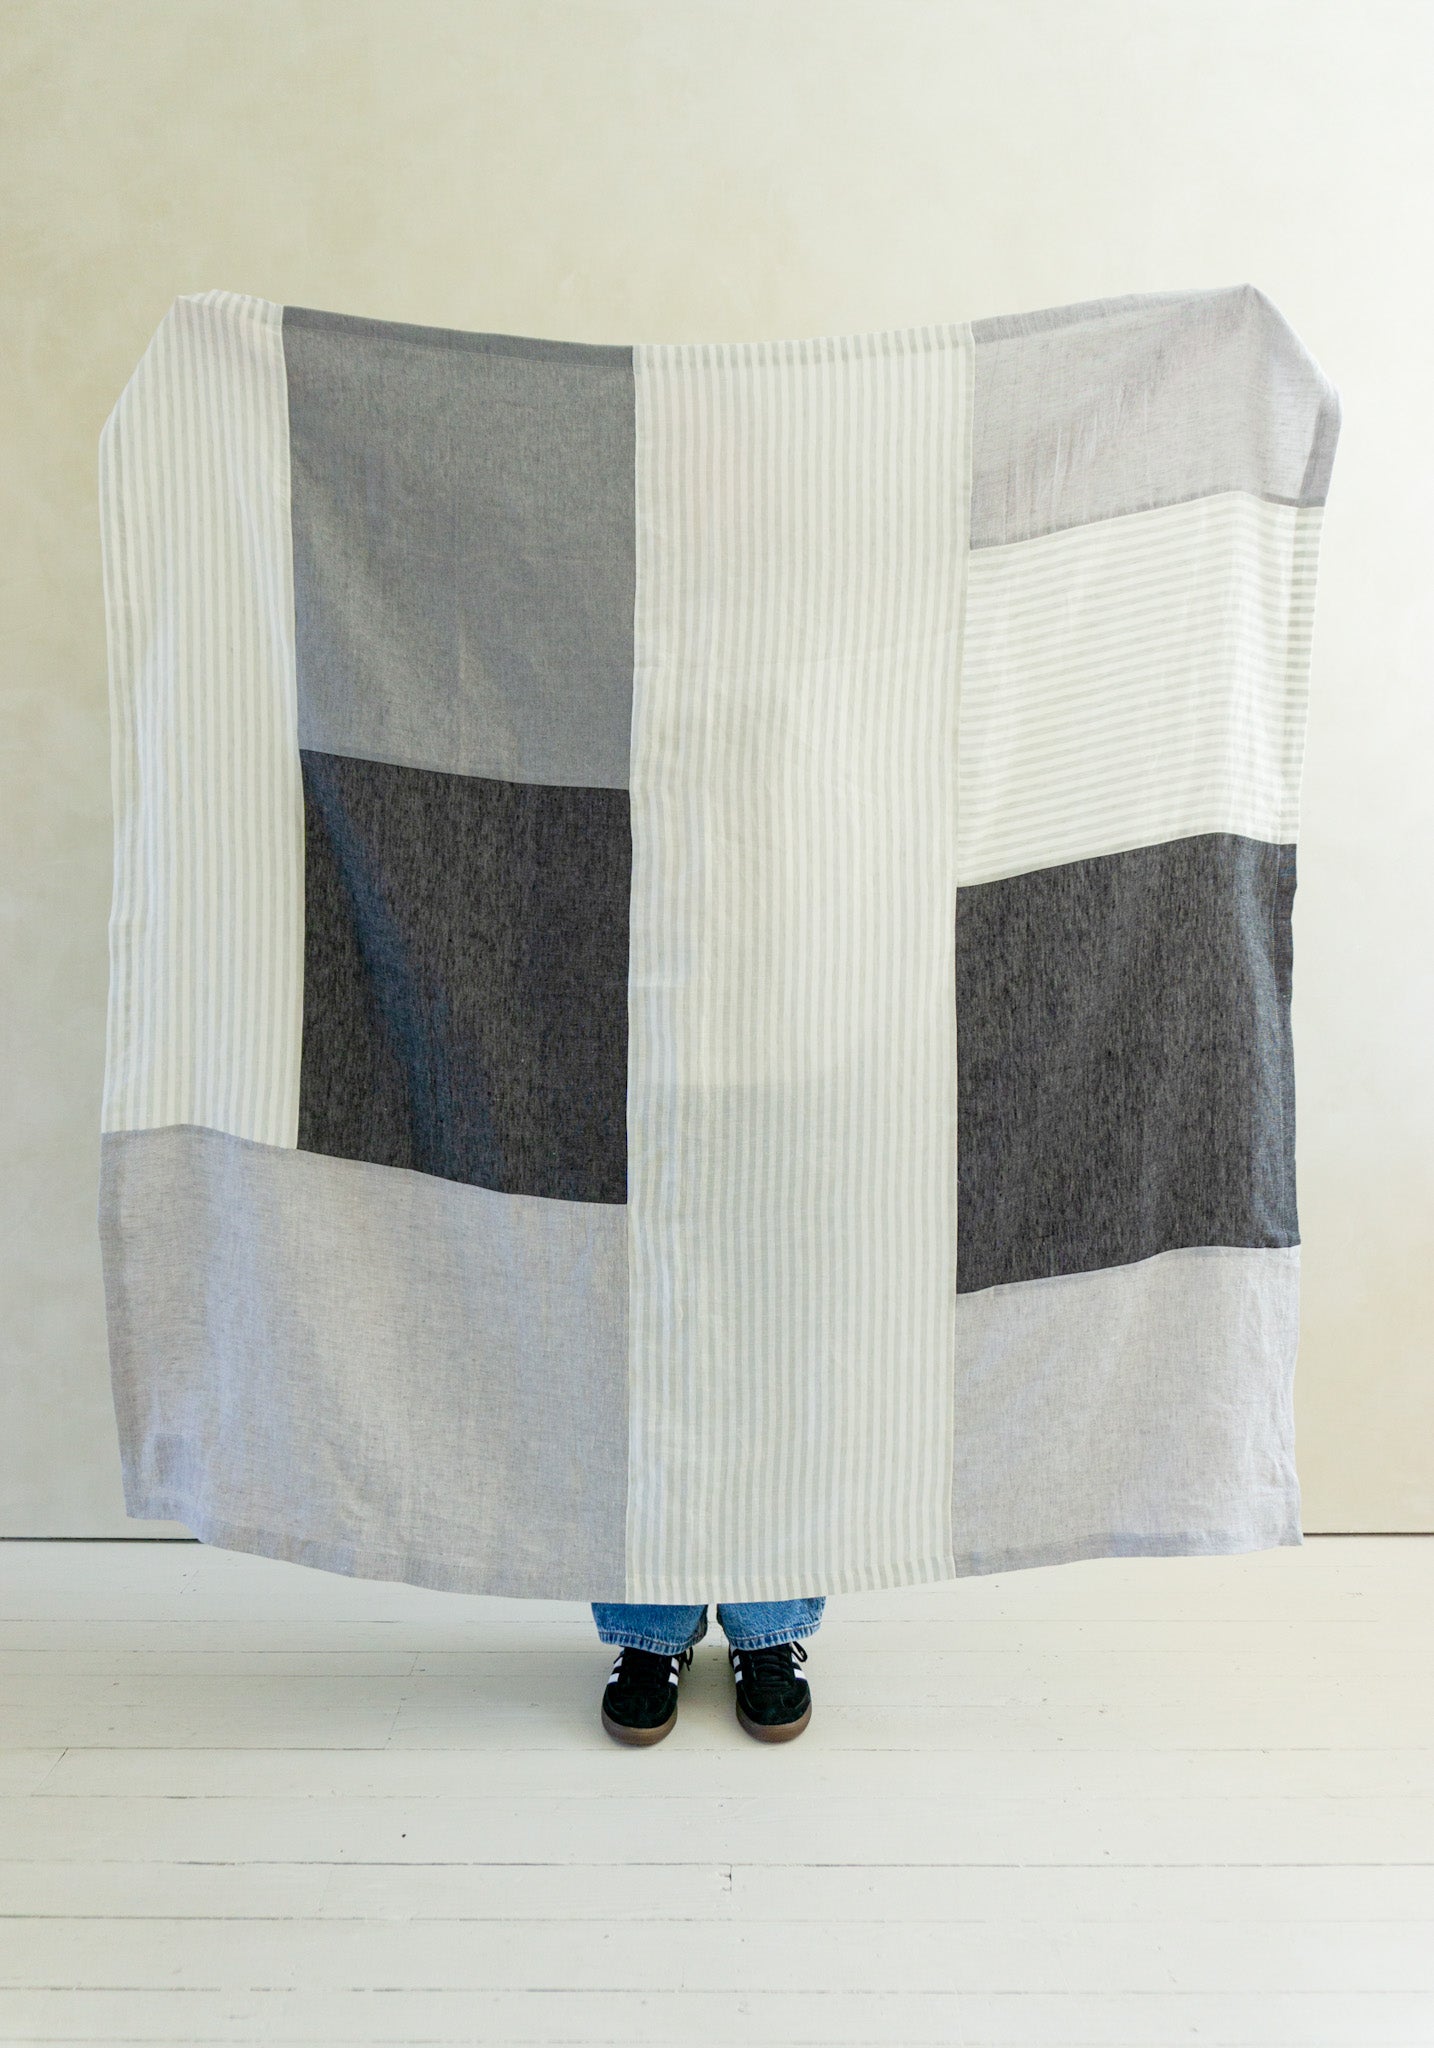 Quilted Linen Textile in Charcoal and Stripes